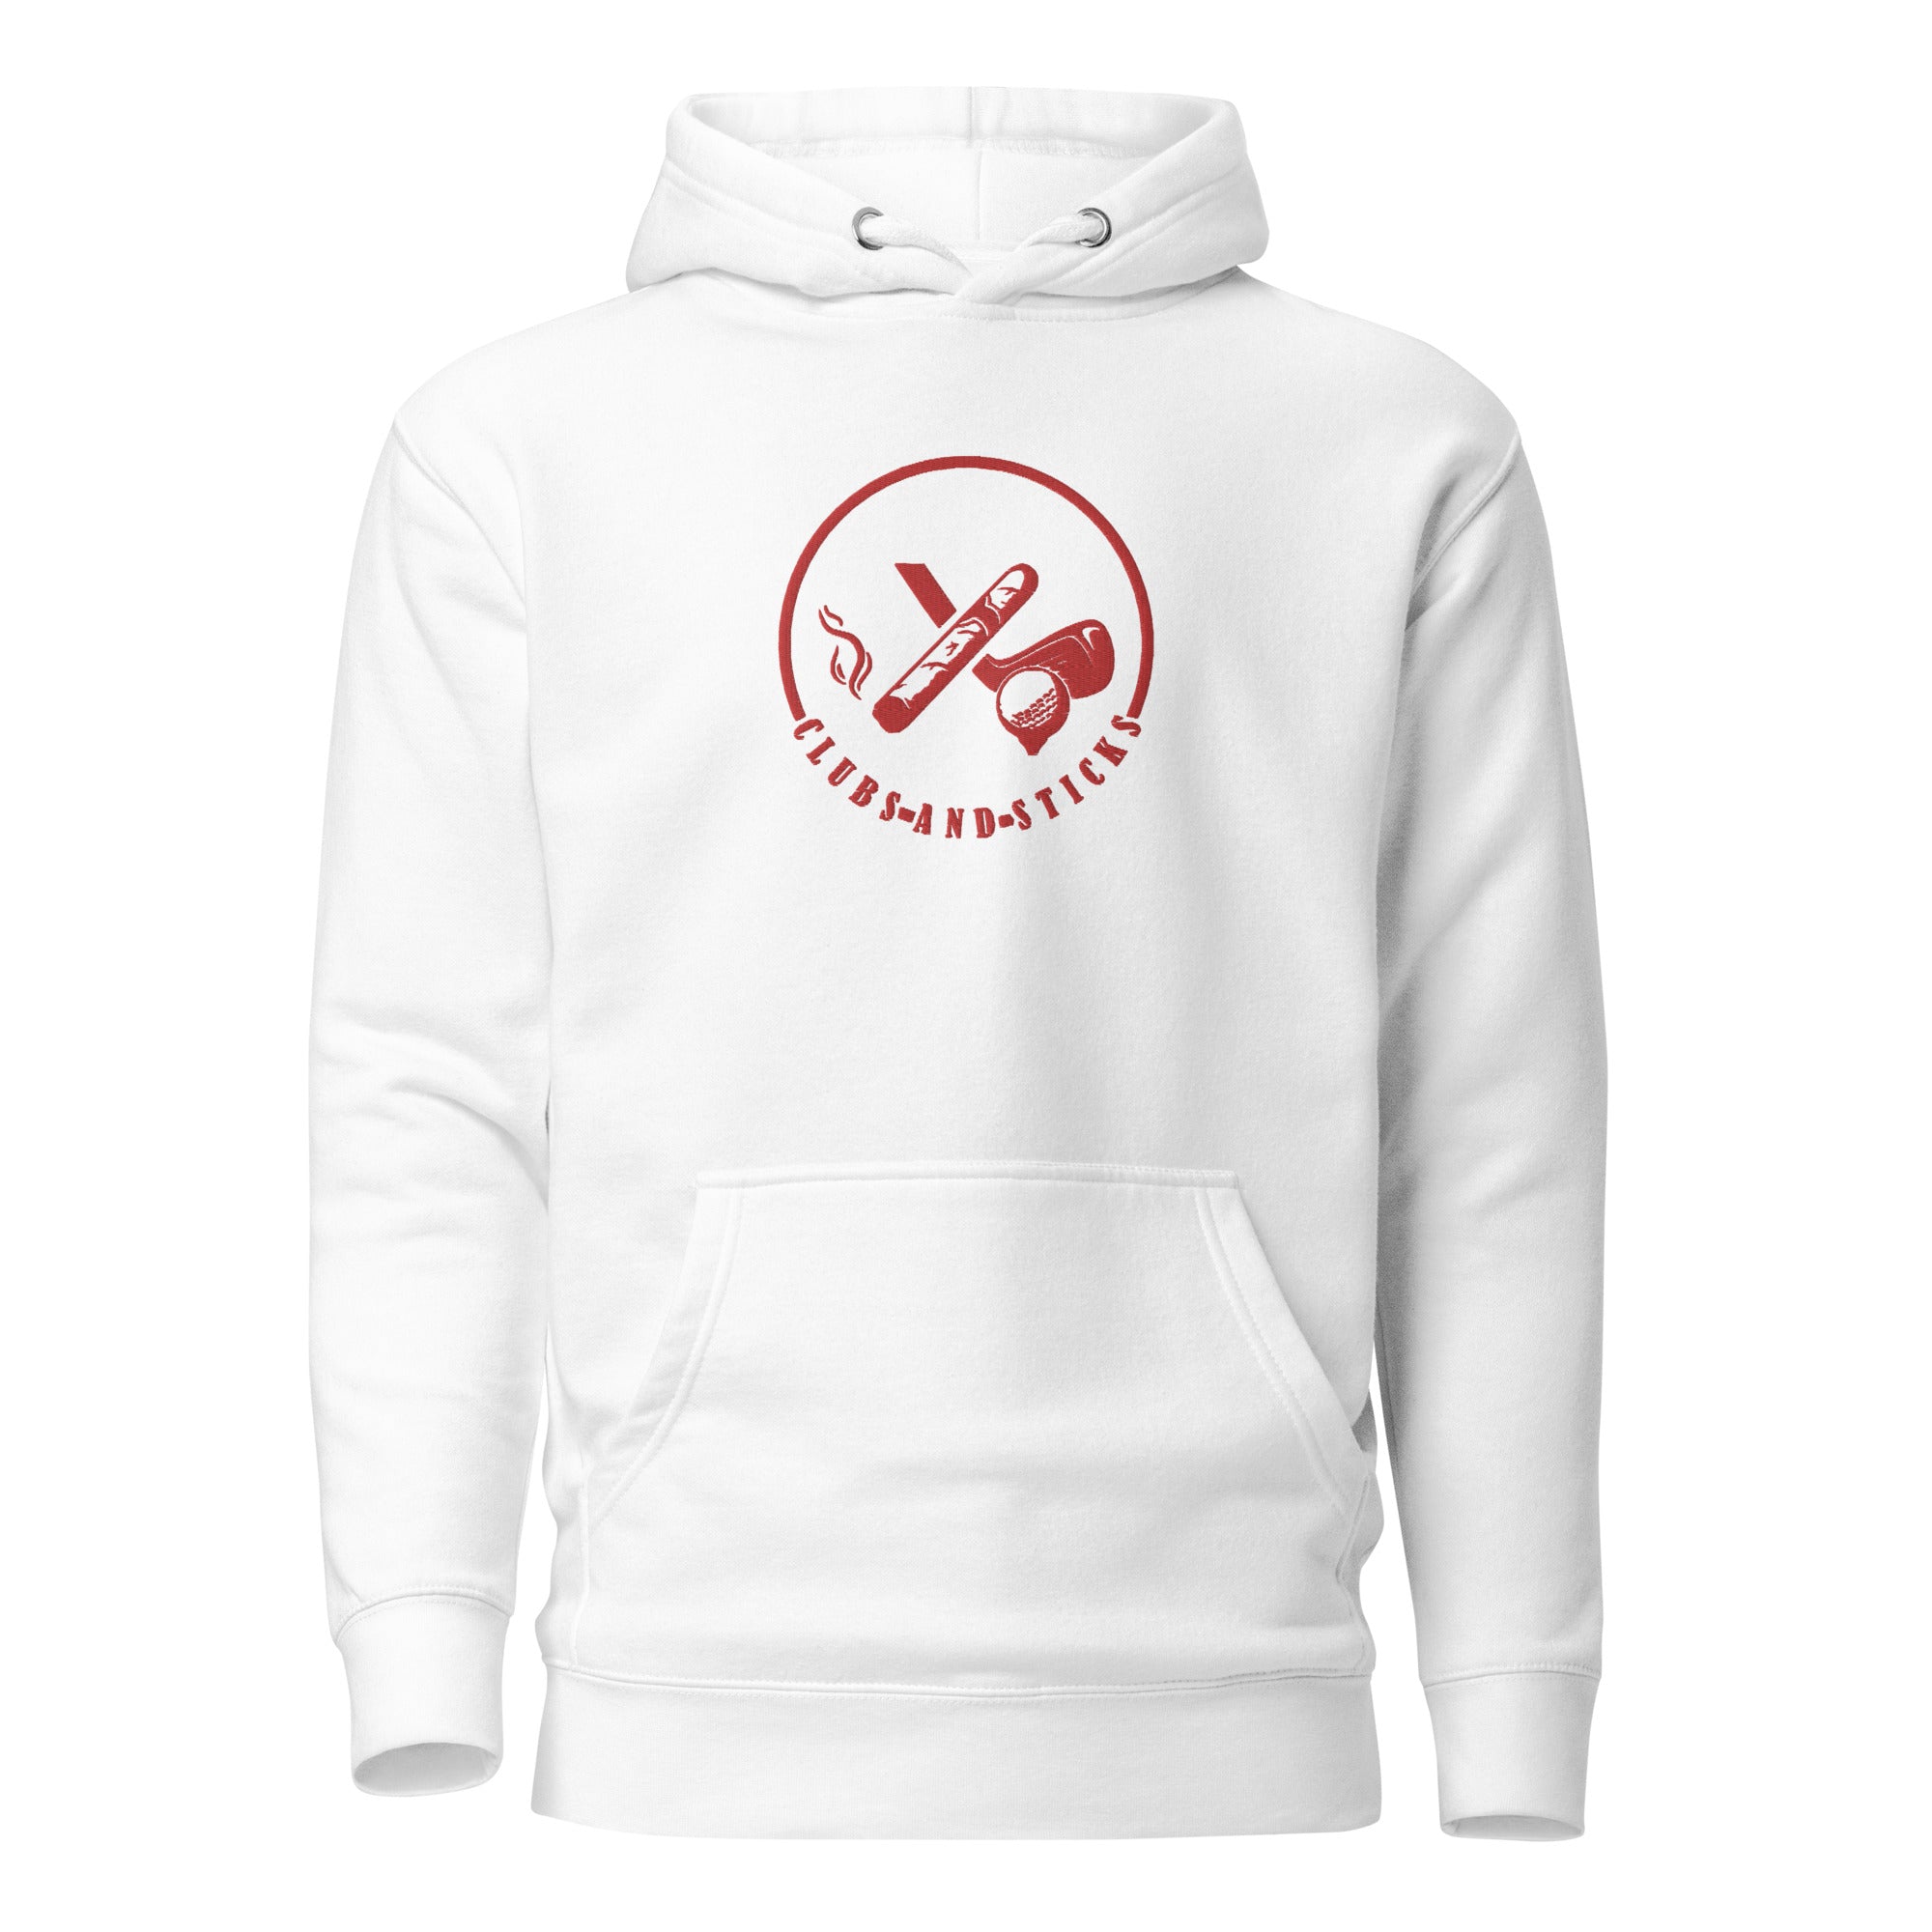 Clubs and Sticks Embroidered Red Logo Hoodie